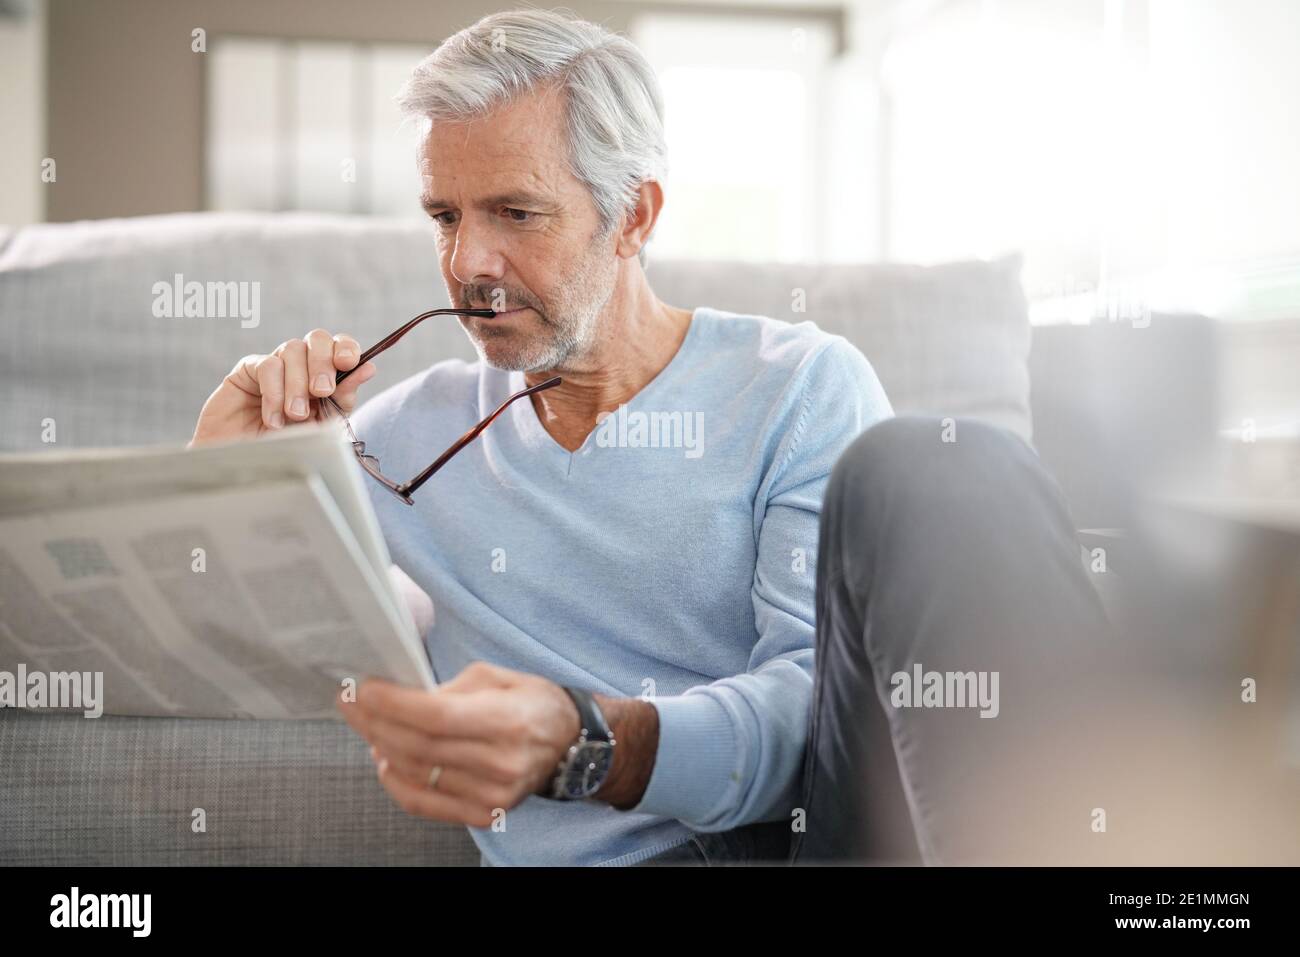 Attractive senior man relaxing at home reading newspaper Stock Photo